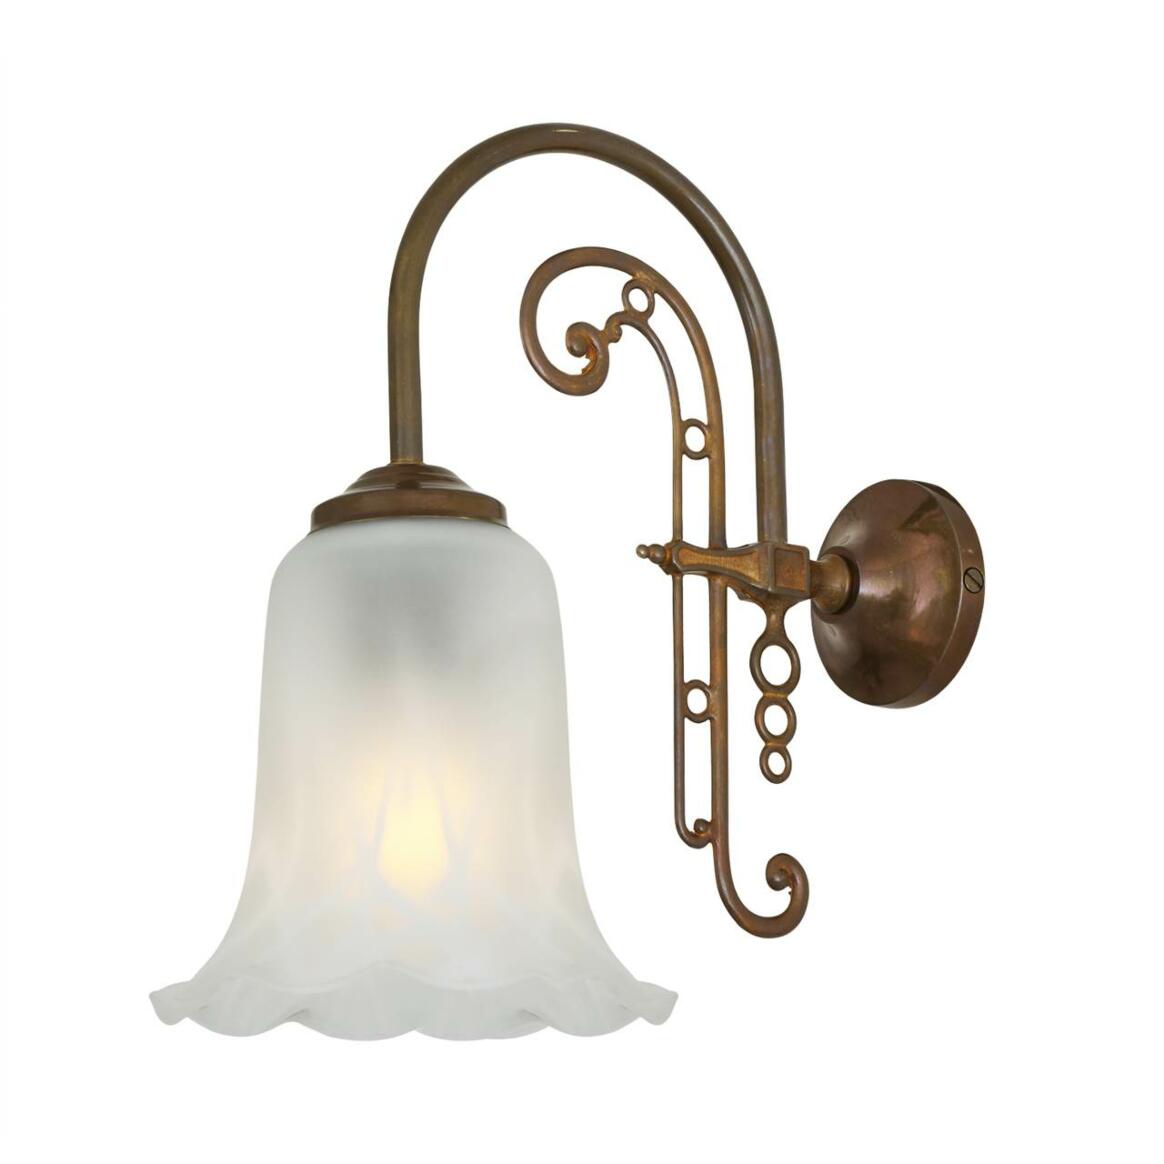 Medan Ornate Brass Wall Light with Opal Etched Glass Shade main product image